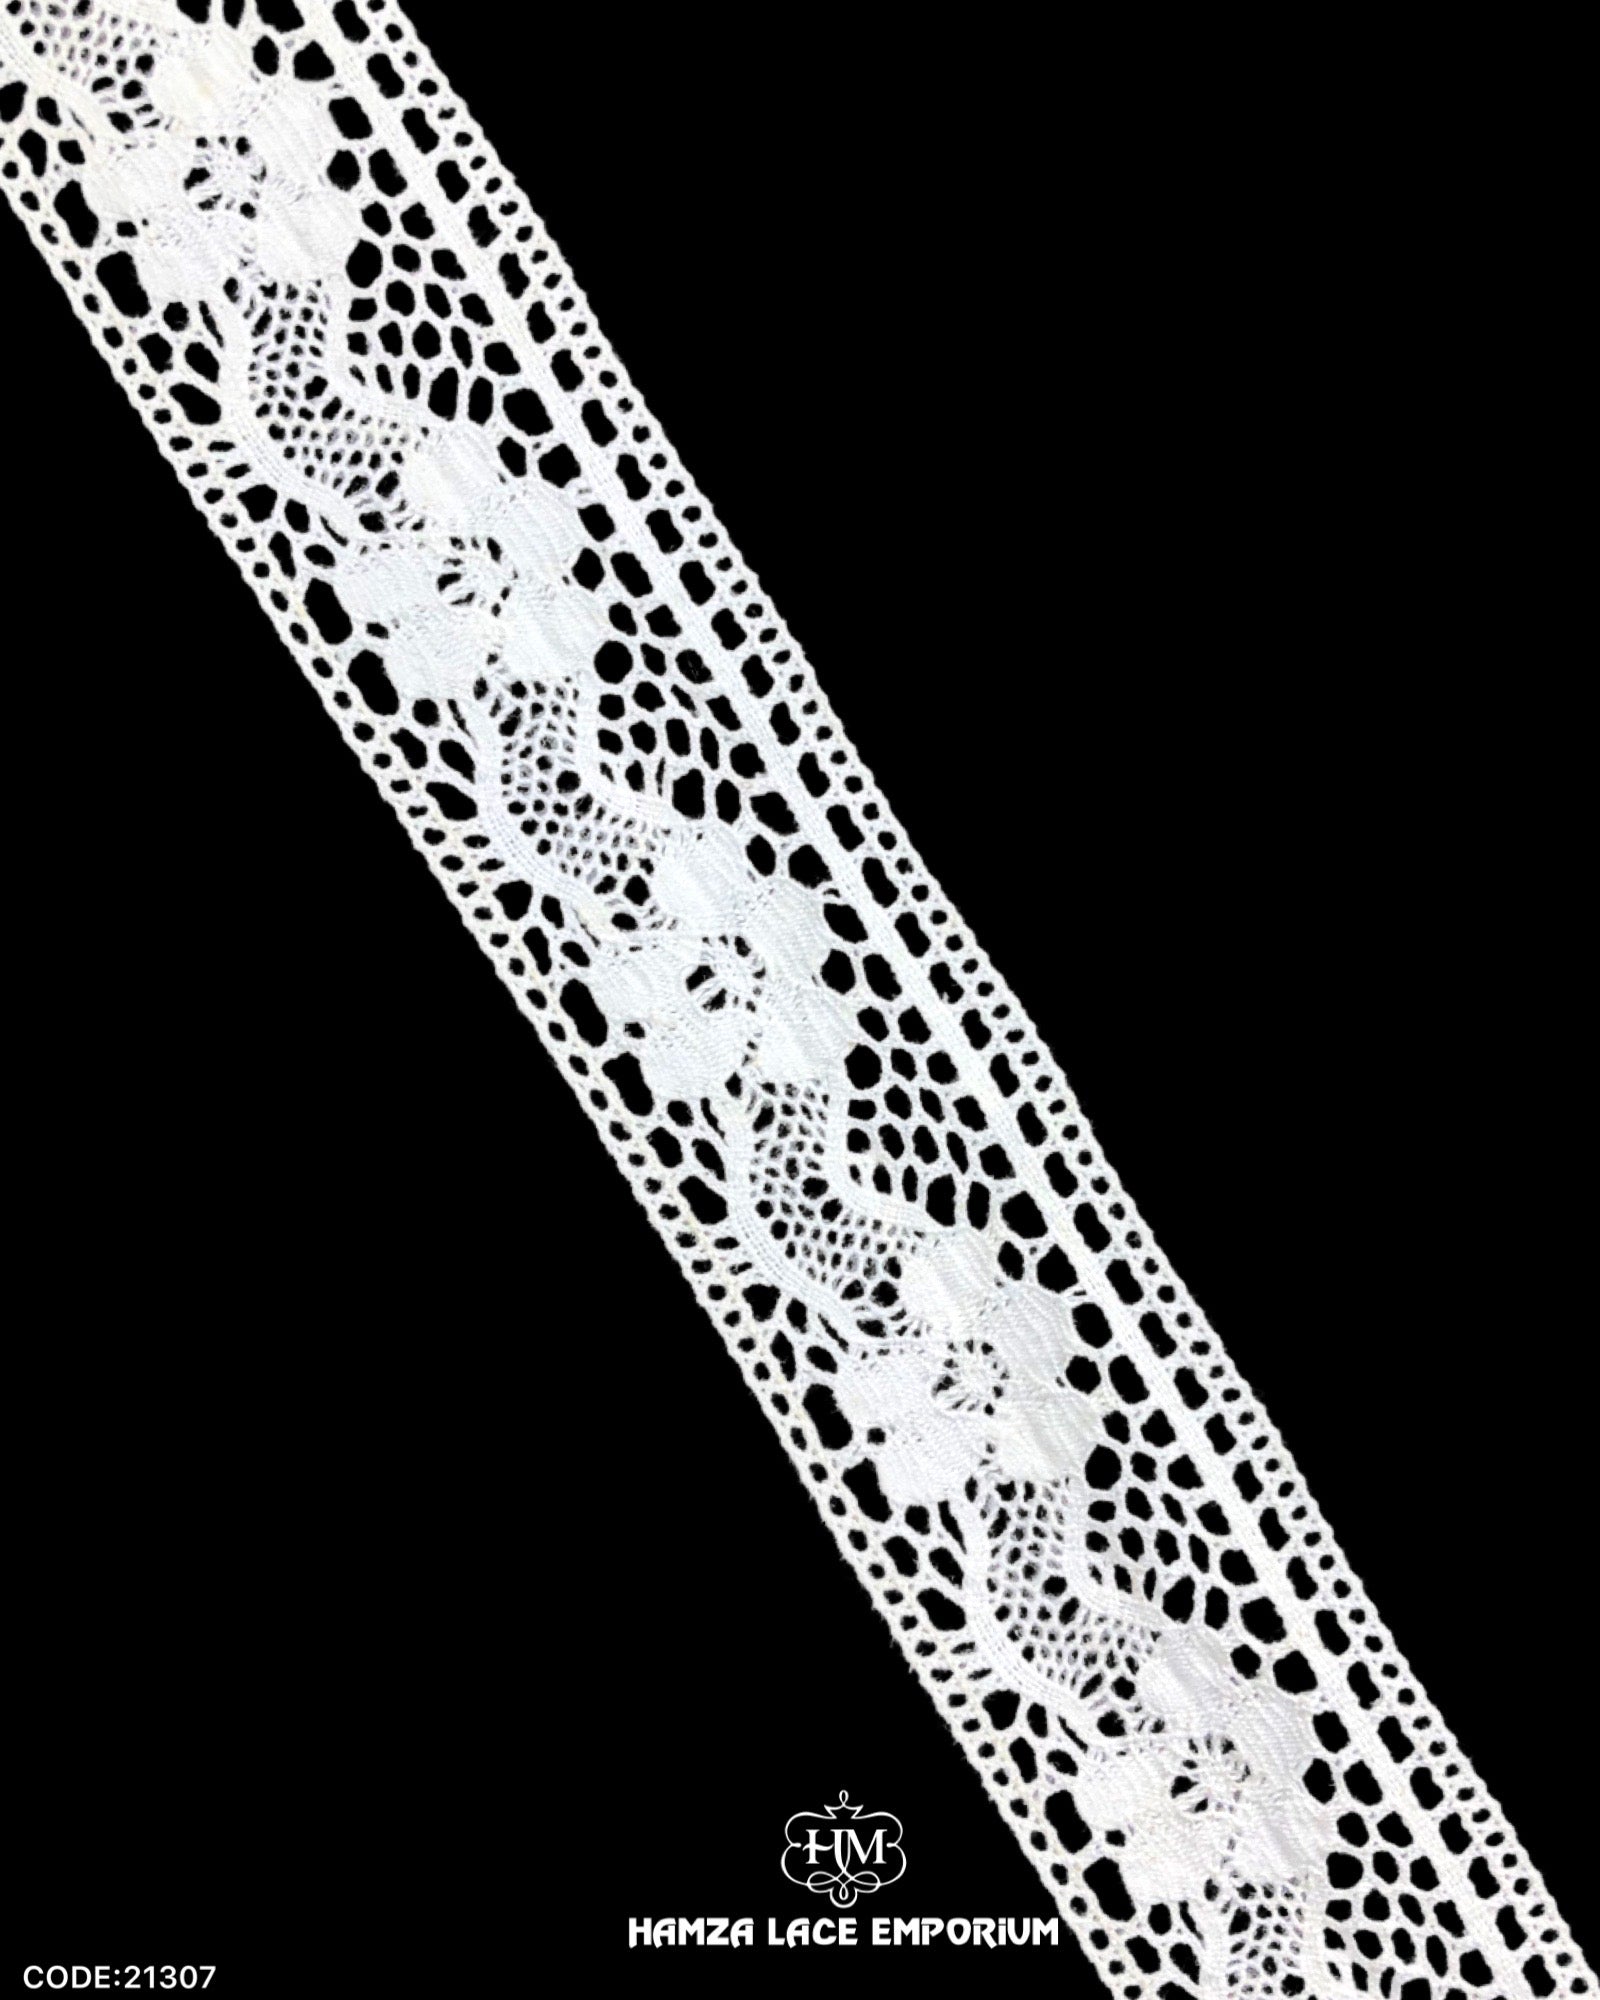 'Center Filling Crochet Lace 21307' with the brand name 'Hamza Lace' written at the bottom